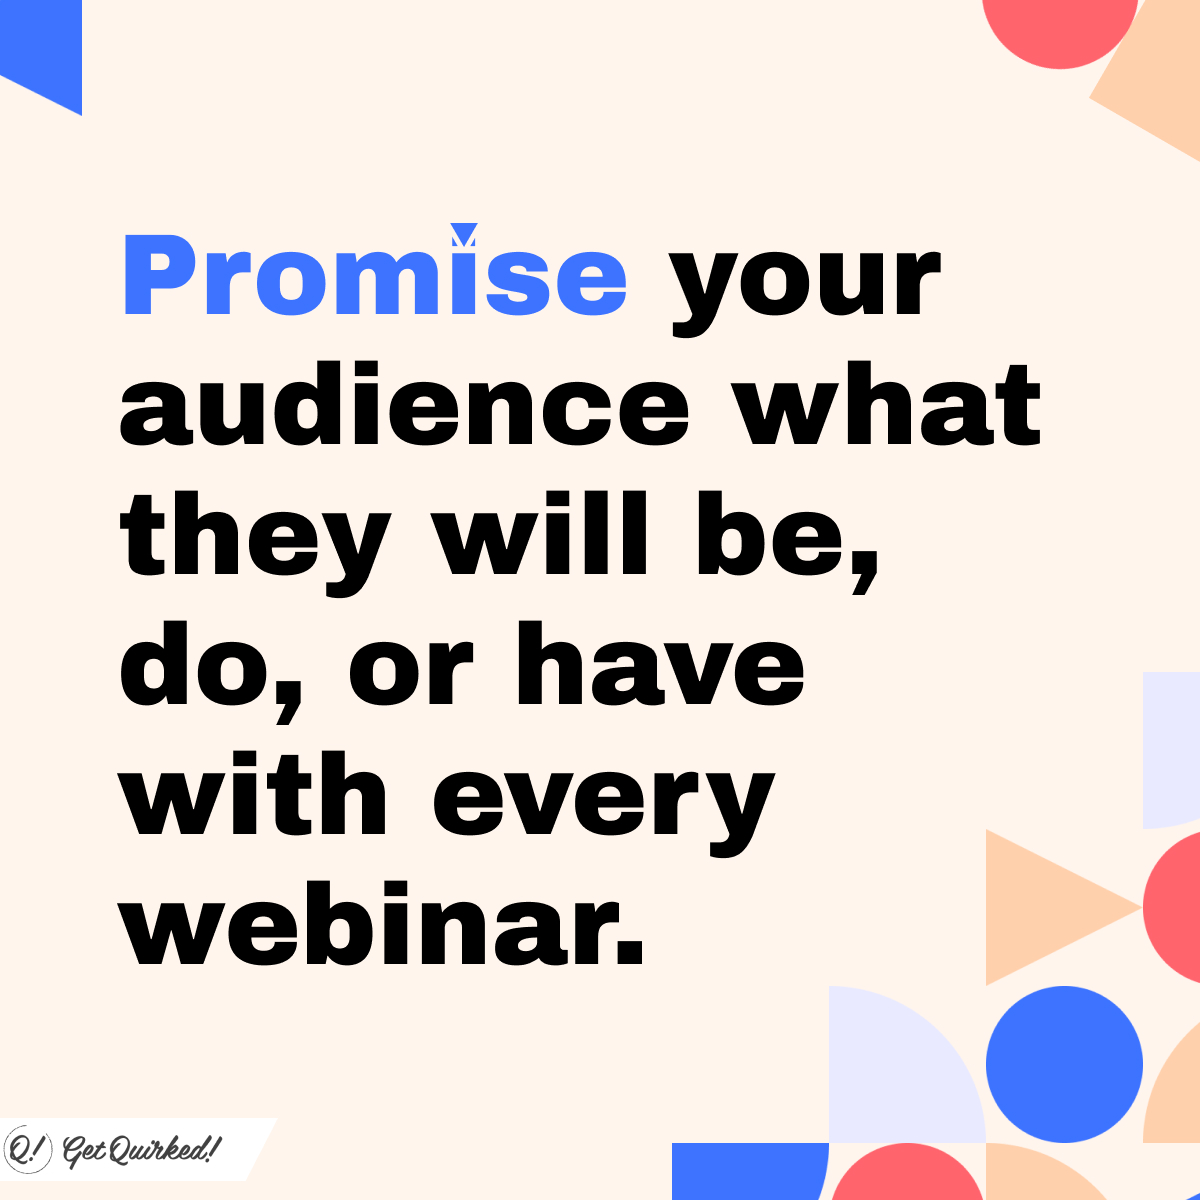 Promise your audience what they will be, do, or have with all B2B webinars.